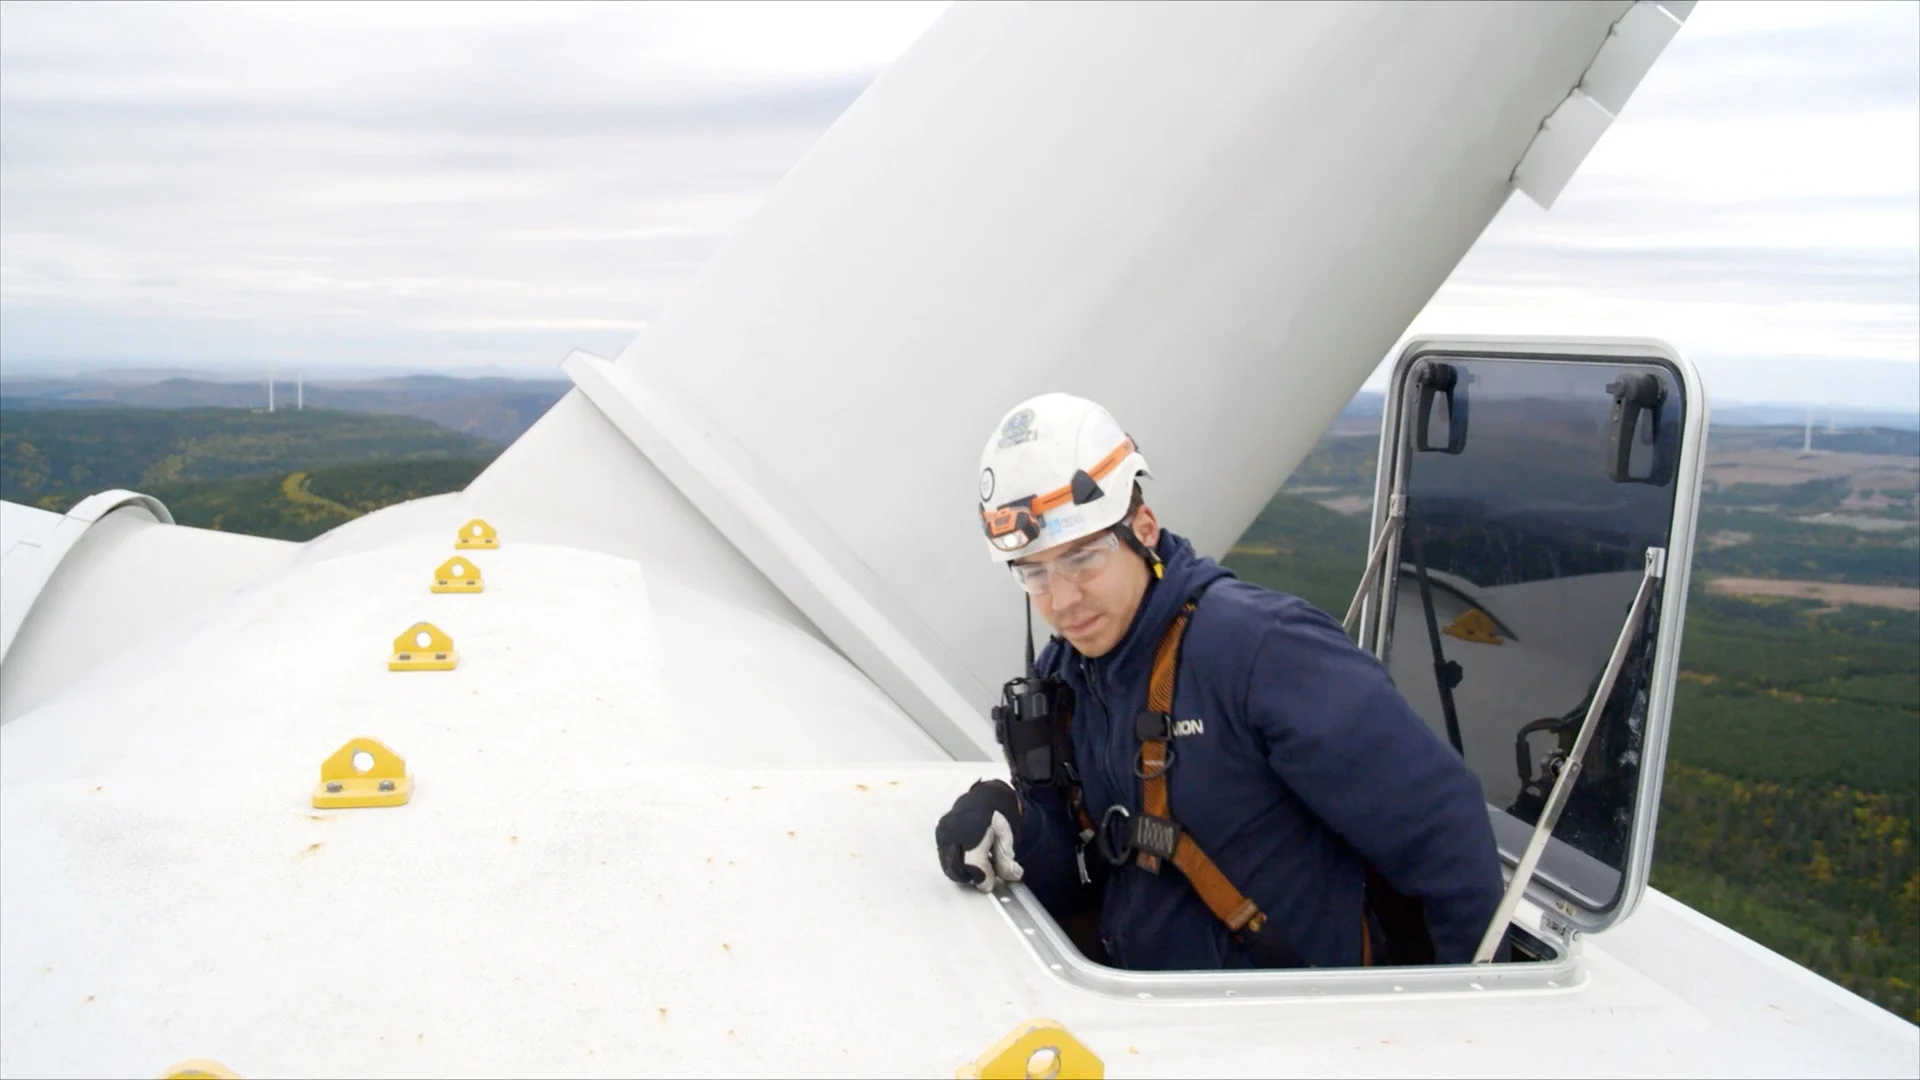 Indigenous-owned wind farm is thriving in one of Quebec's windiest regions